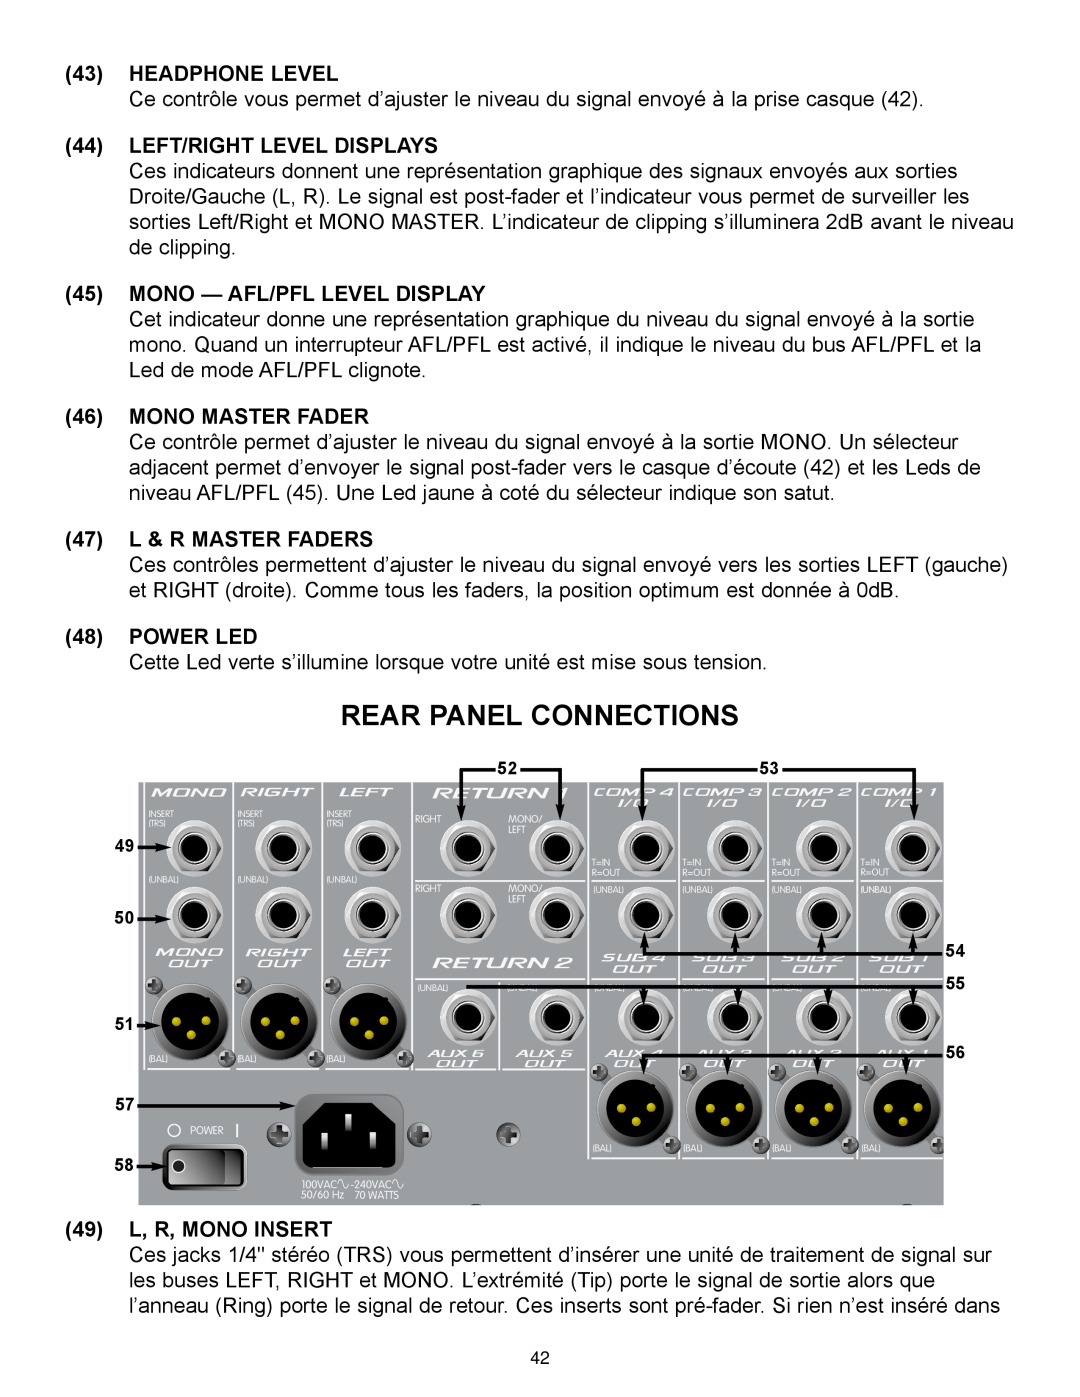 Peavey RQ 4300 Series Rear Panel Connections, Headphone Level, Left/Right Level Displays, Mono - Afl/Pfl Level Display 